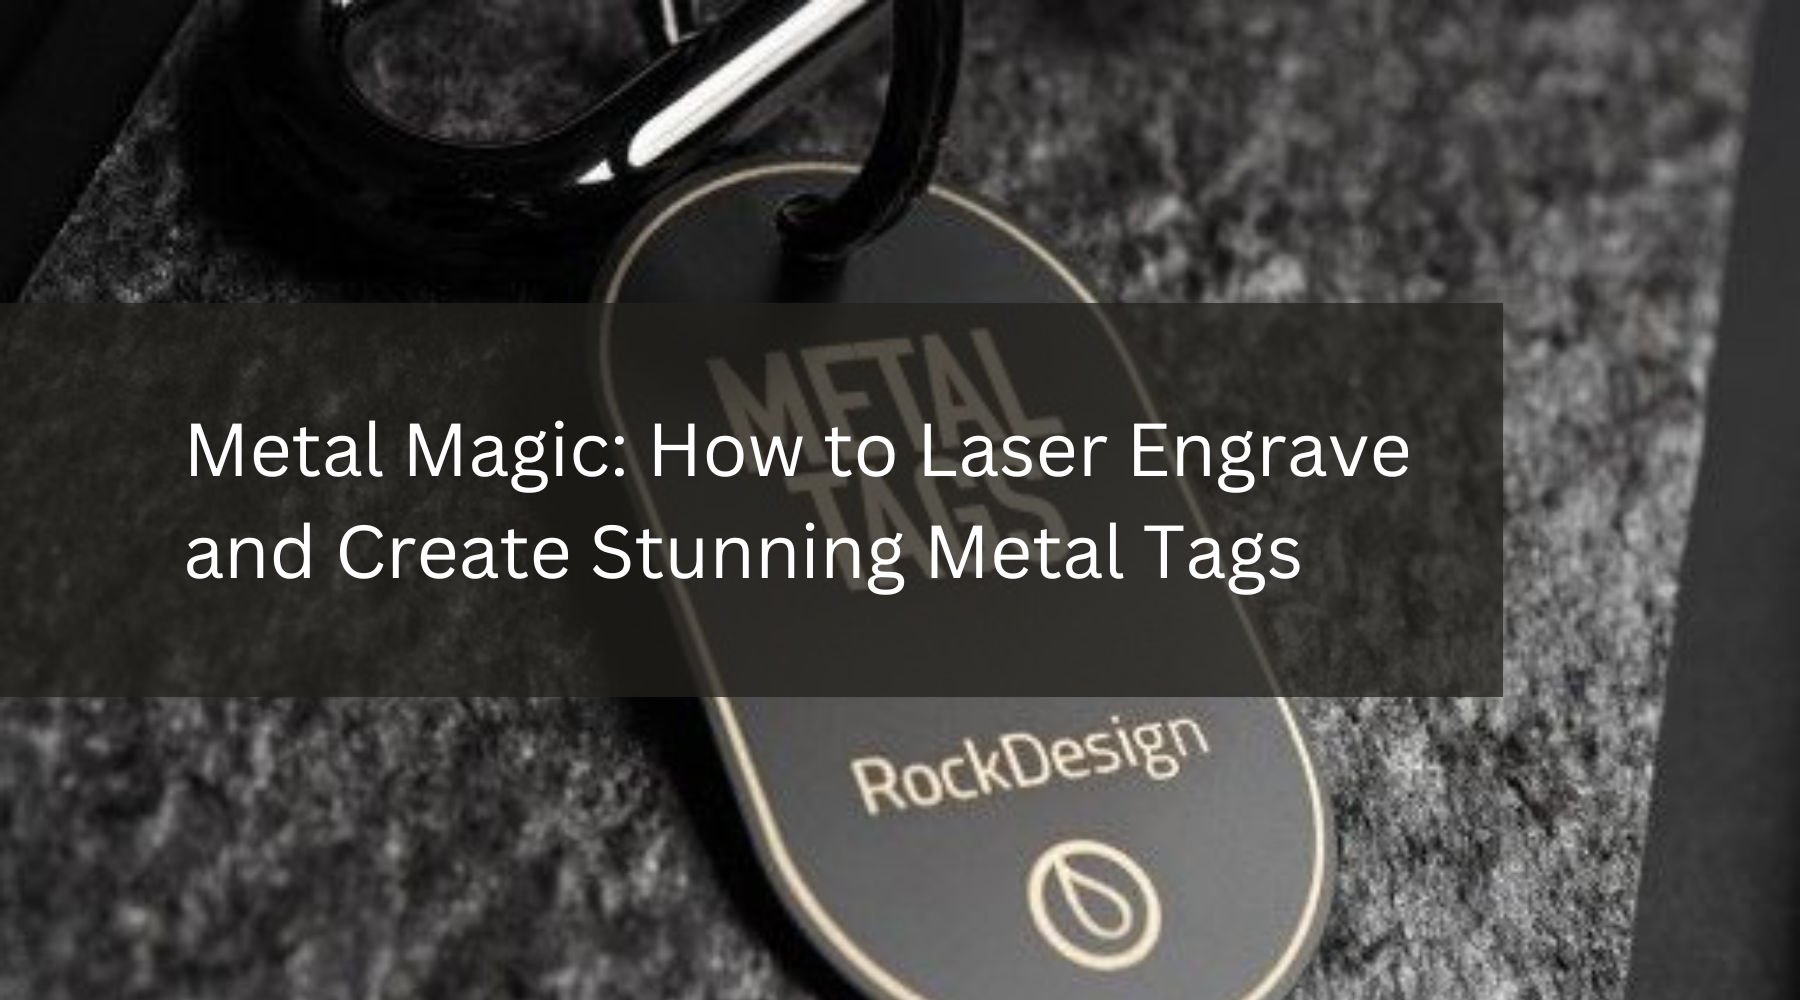 Metal Magic: How to Laser Engrave and Create Stunning Metal Tags